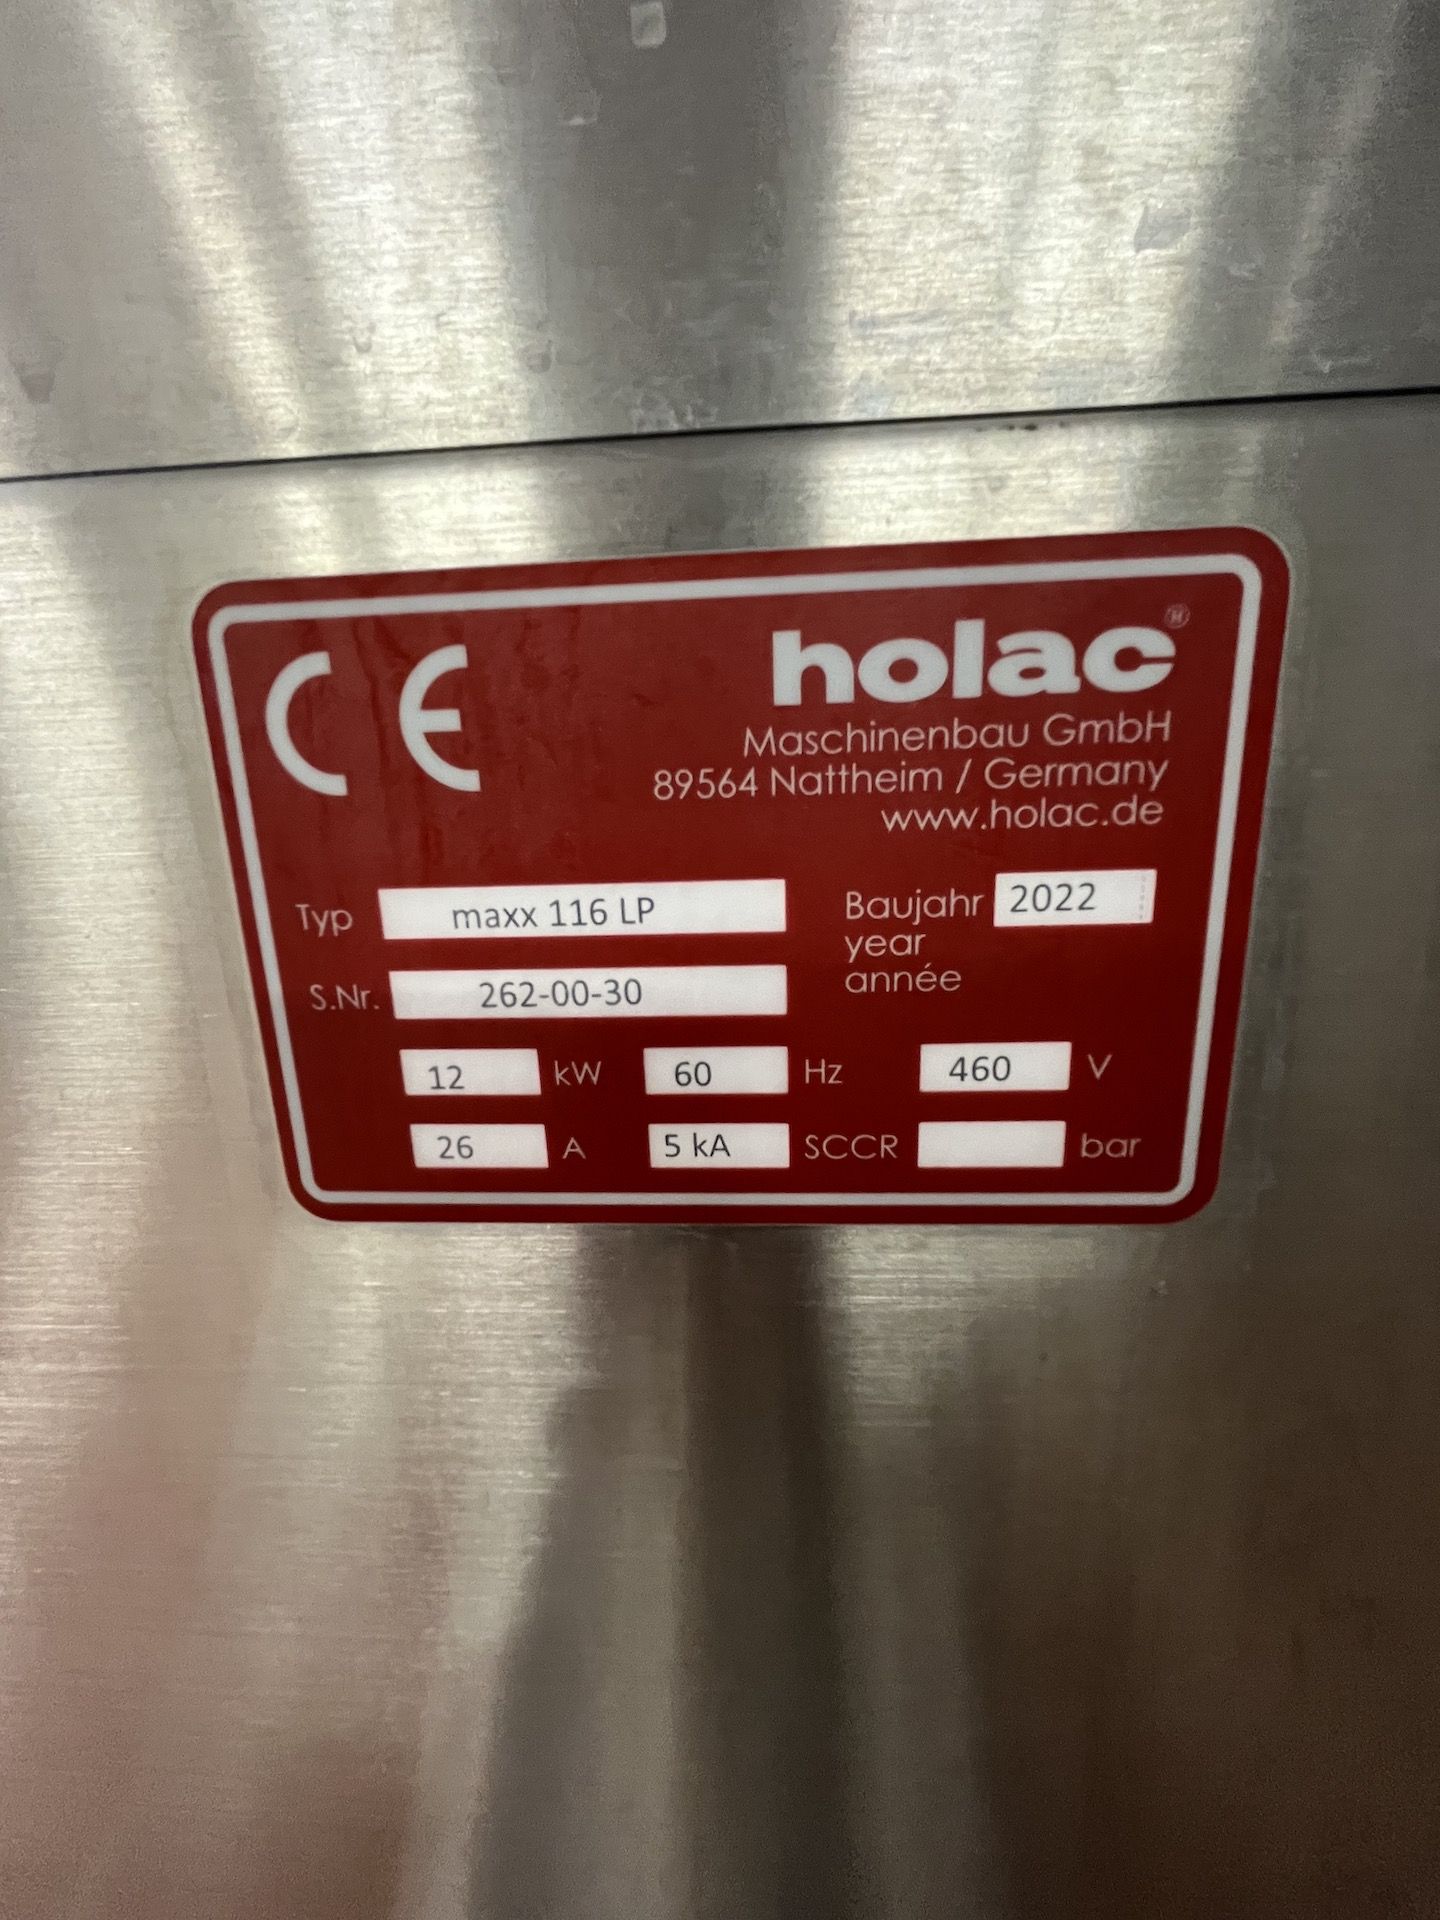 2022 HOLAC AUTOMATIC DICER, MODEL MAXX116LP, S/N 262-00-30, 460 V - Image 6 of 6